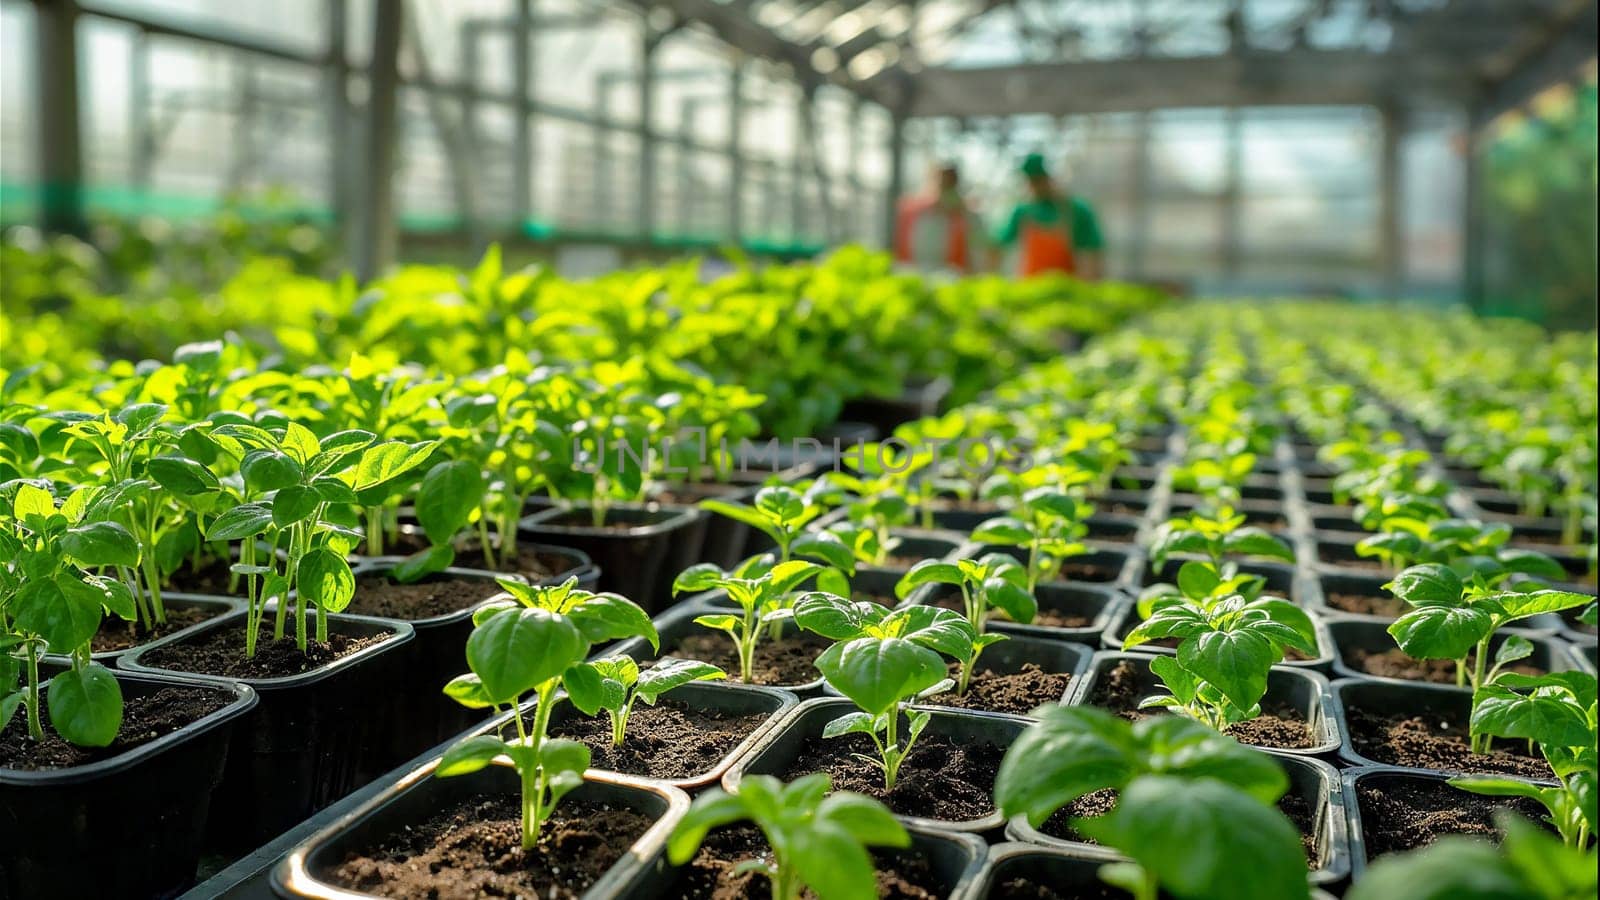 Rows of seedling trays filled with young plants inside a modern greenhouse environment